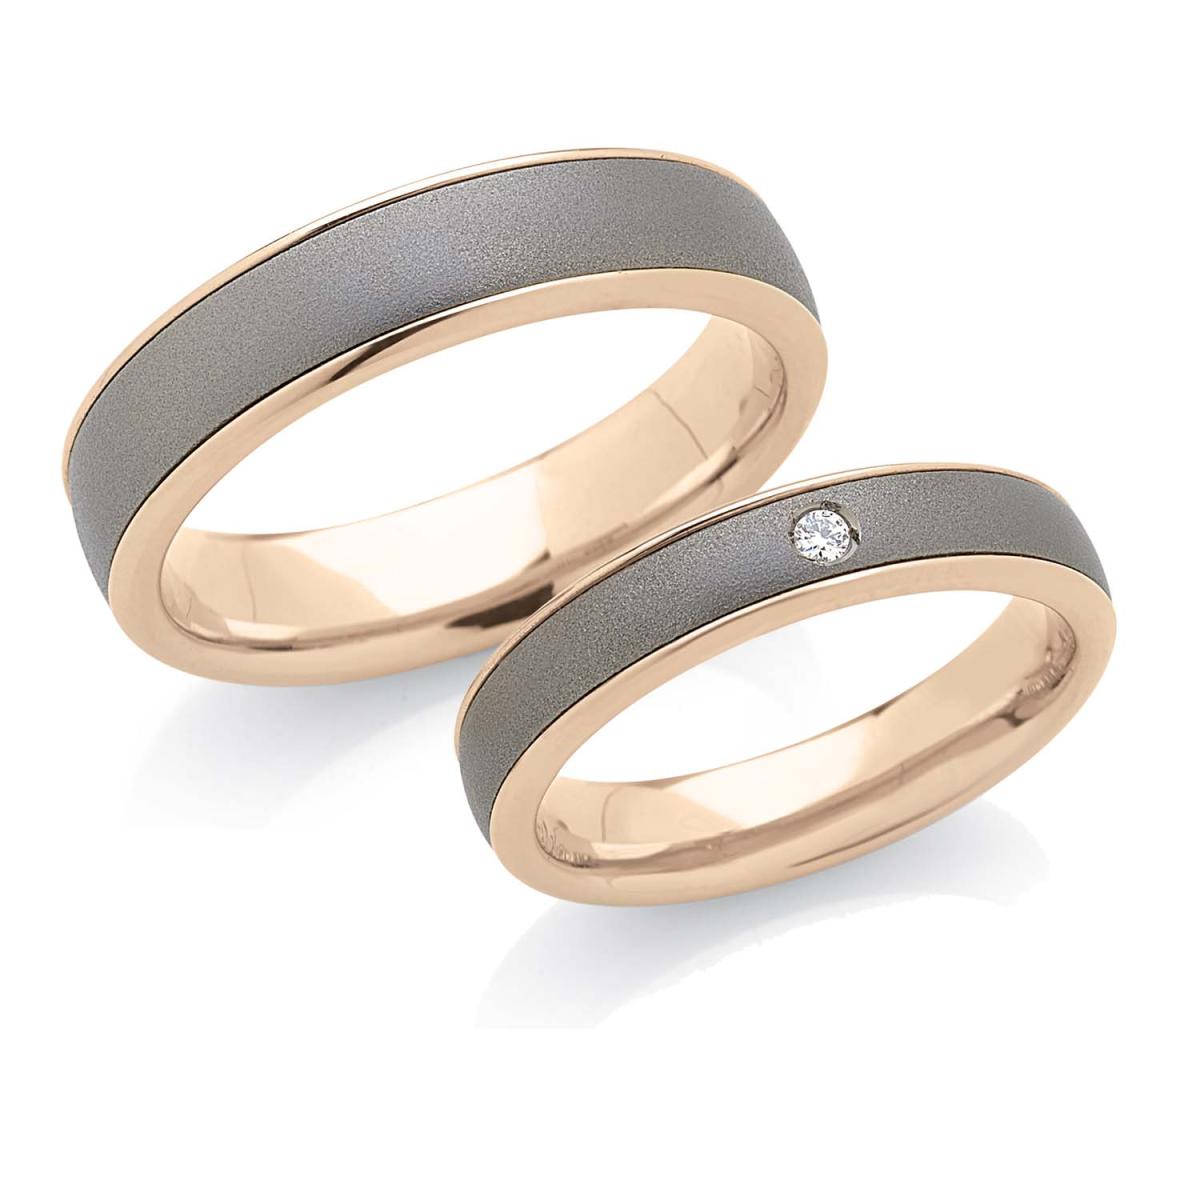 Wedding ring in 18kt gold and titanium - 562